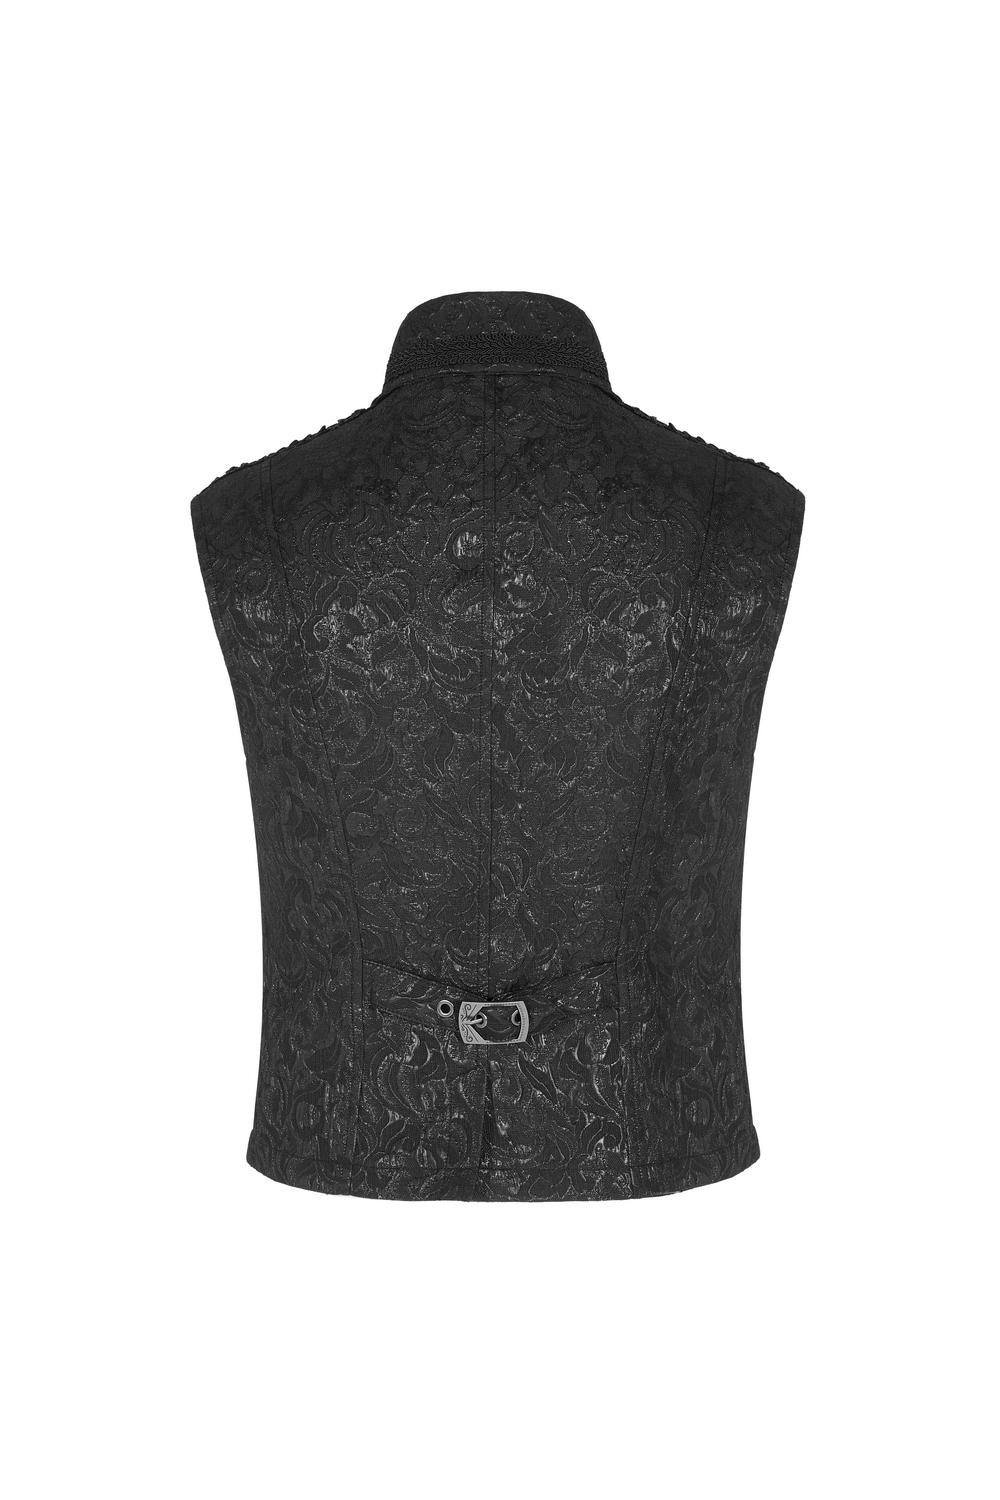 Steampunk Male Velvet Waistcoat with Stand Collar